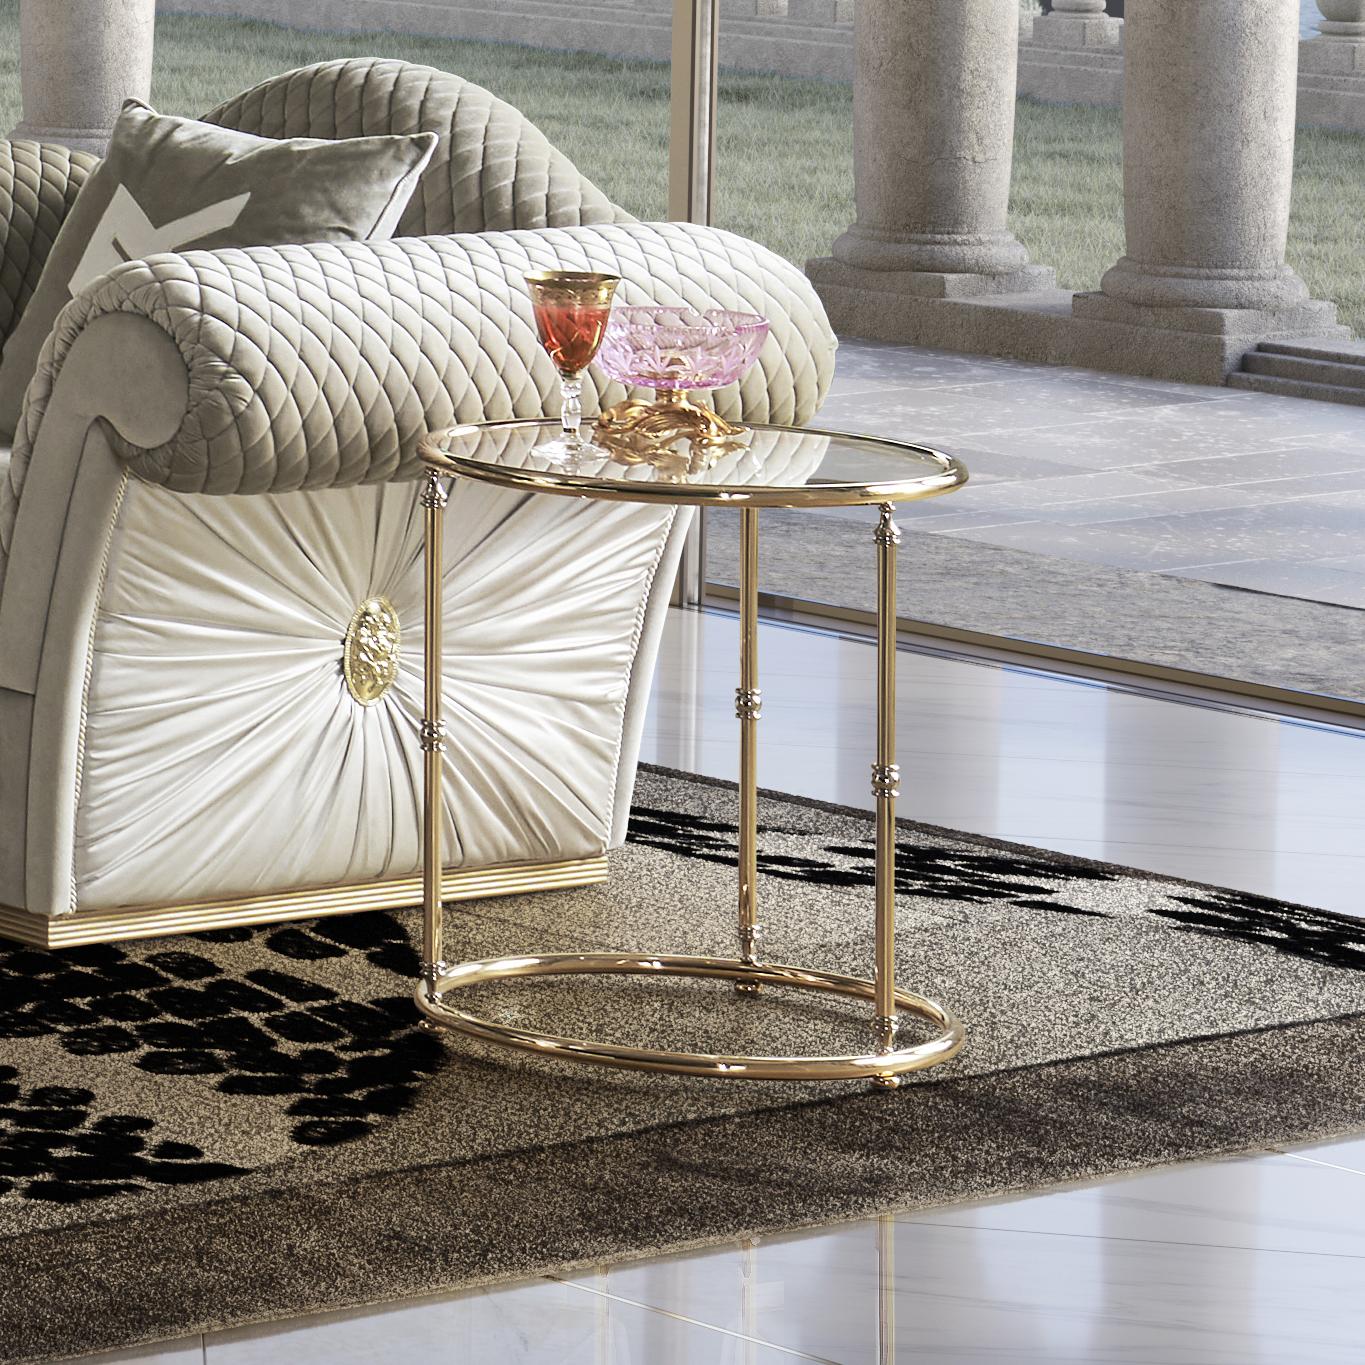 The EL075 side table represents the perfect fusion of style and sophistication:

Made with careful craftsmanship, the high-quality brass gives the coffee table high durability and unparalleled shine. Its gold bath gives it a warm and luxurious